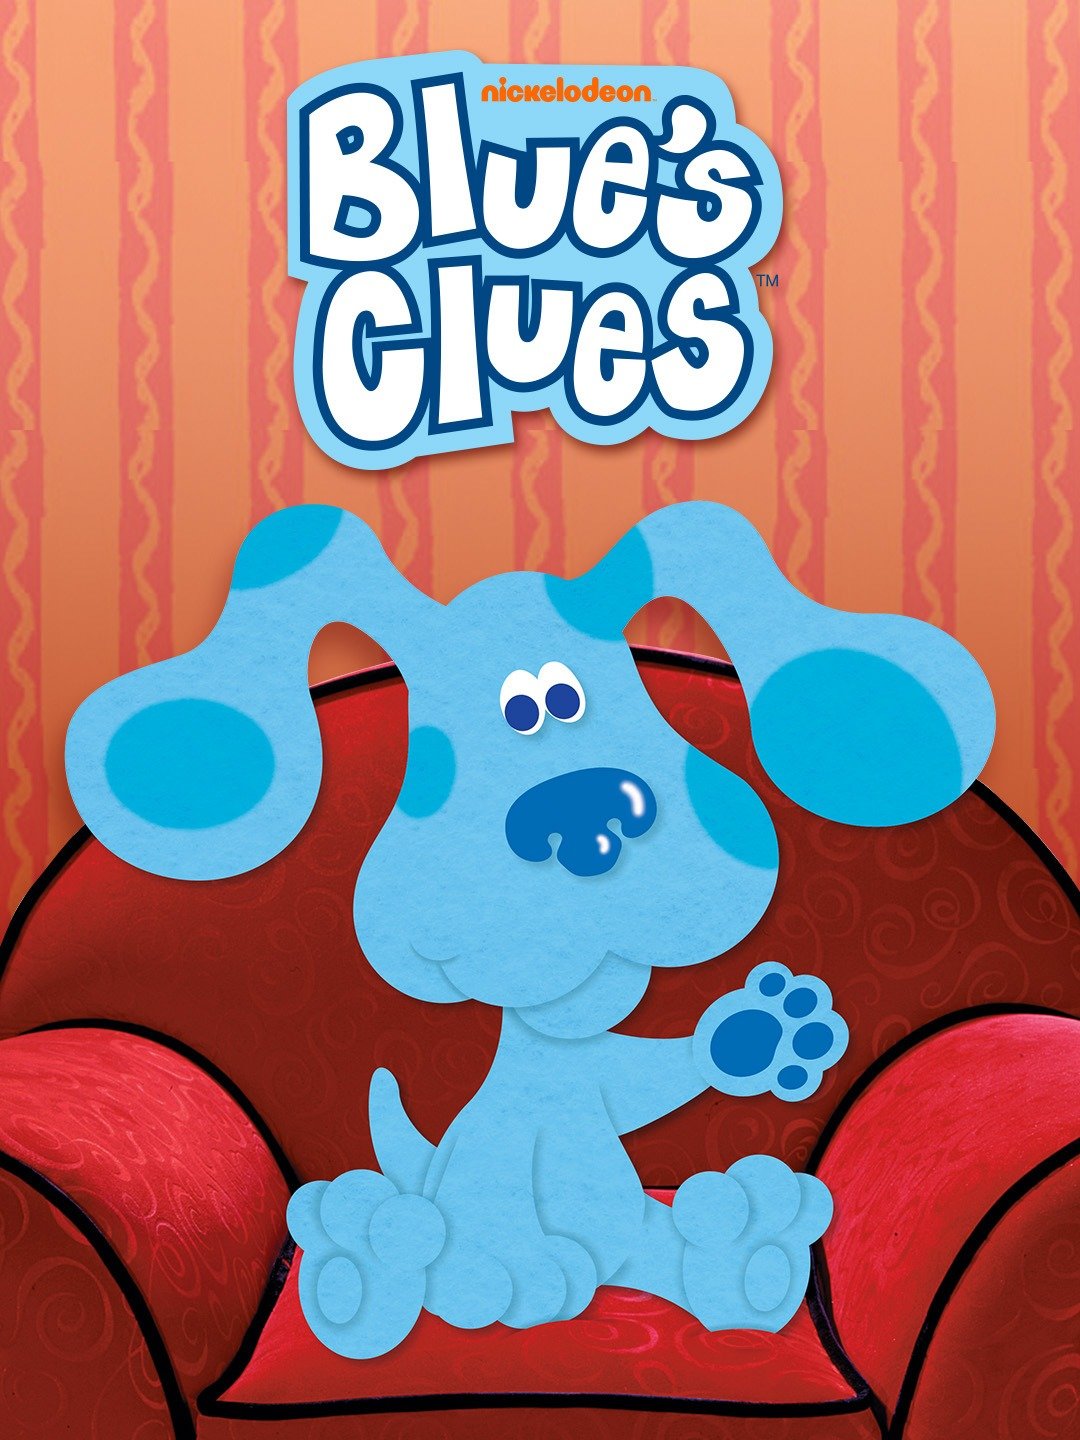 Blue's Clues is an American